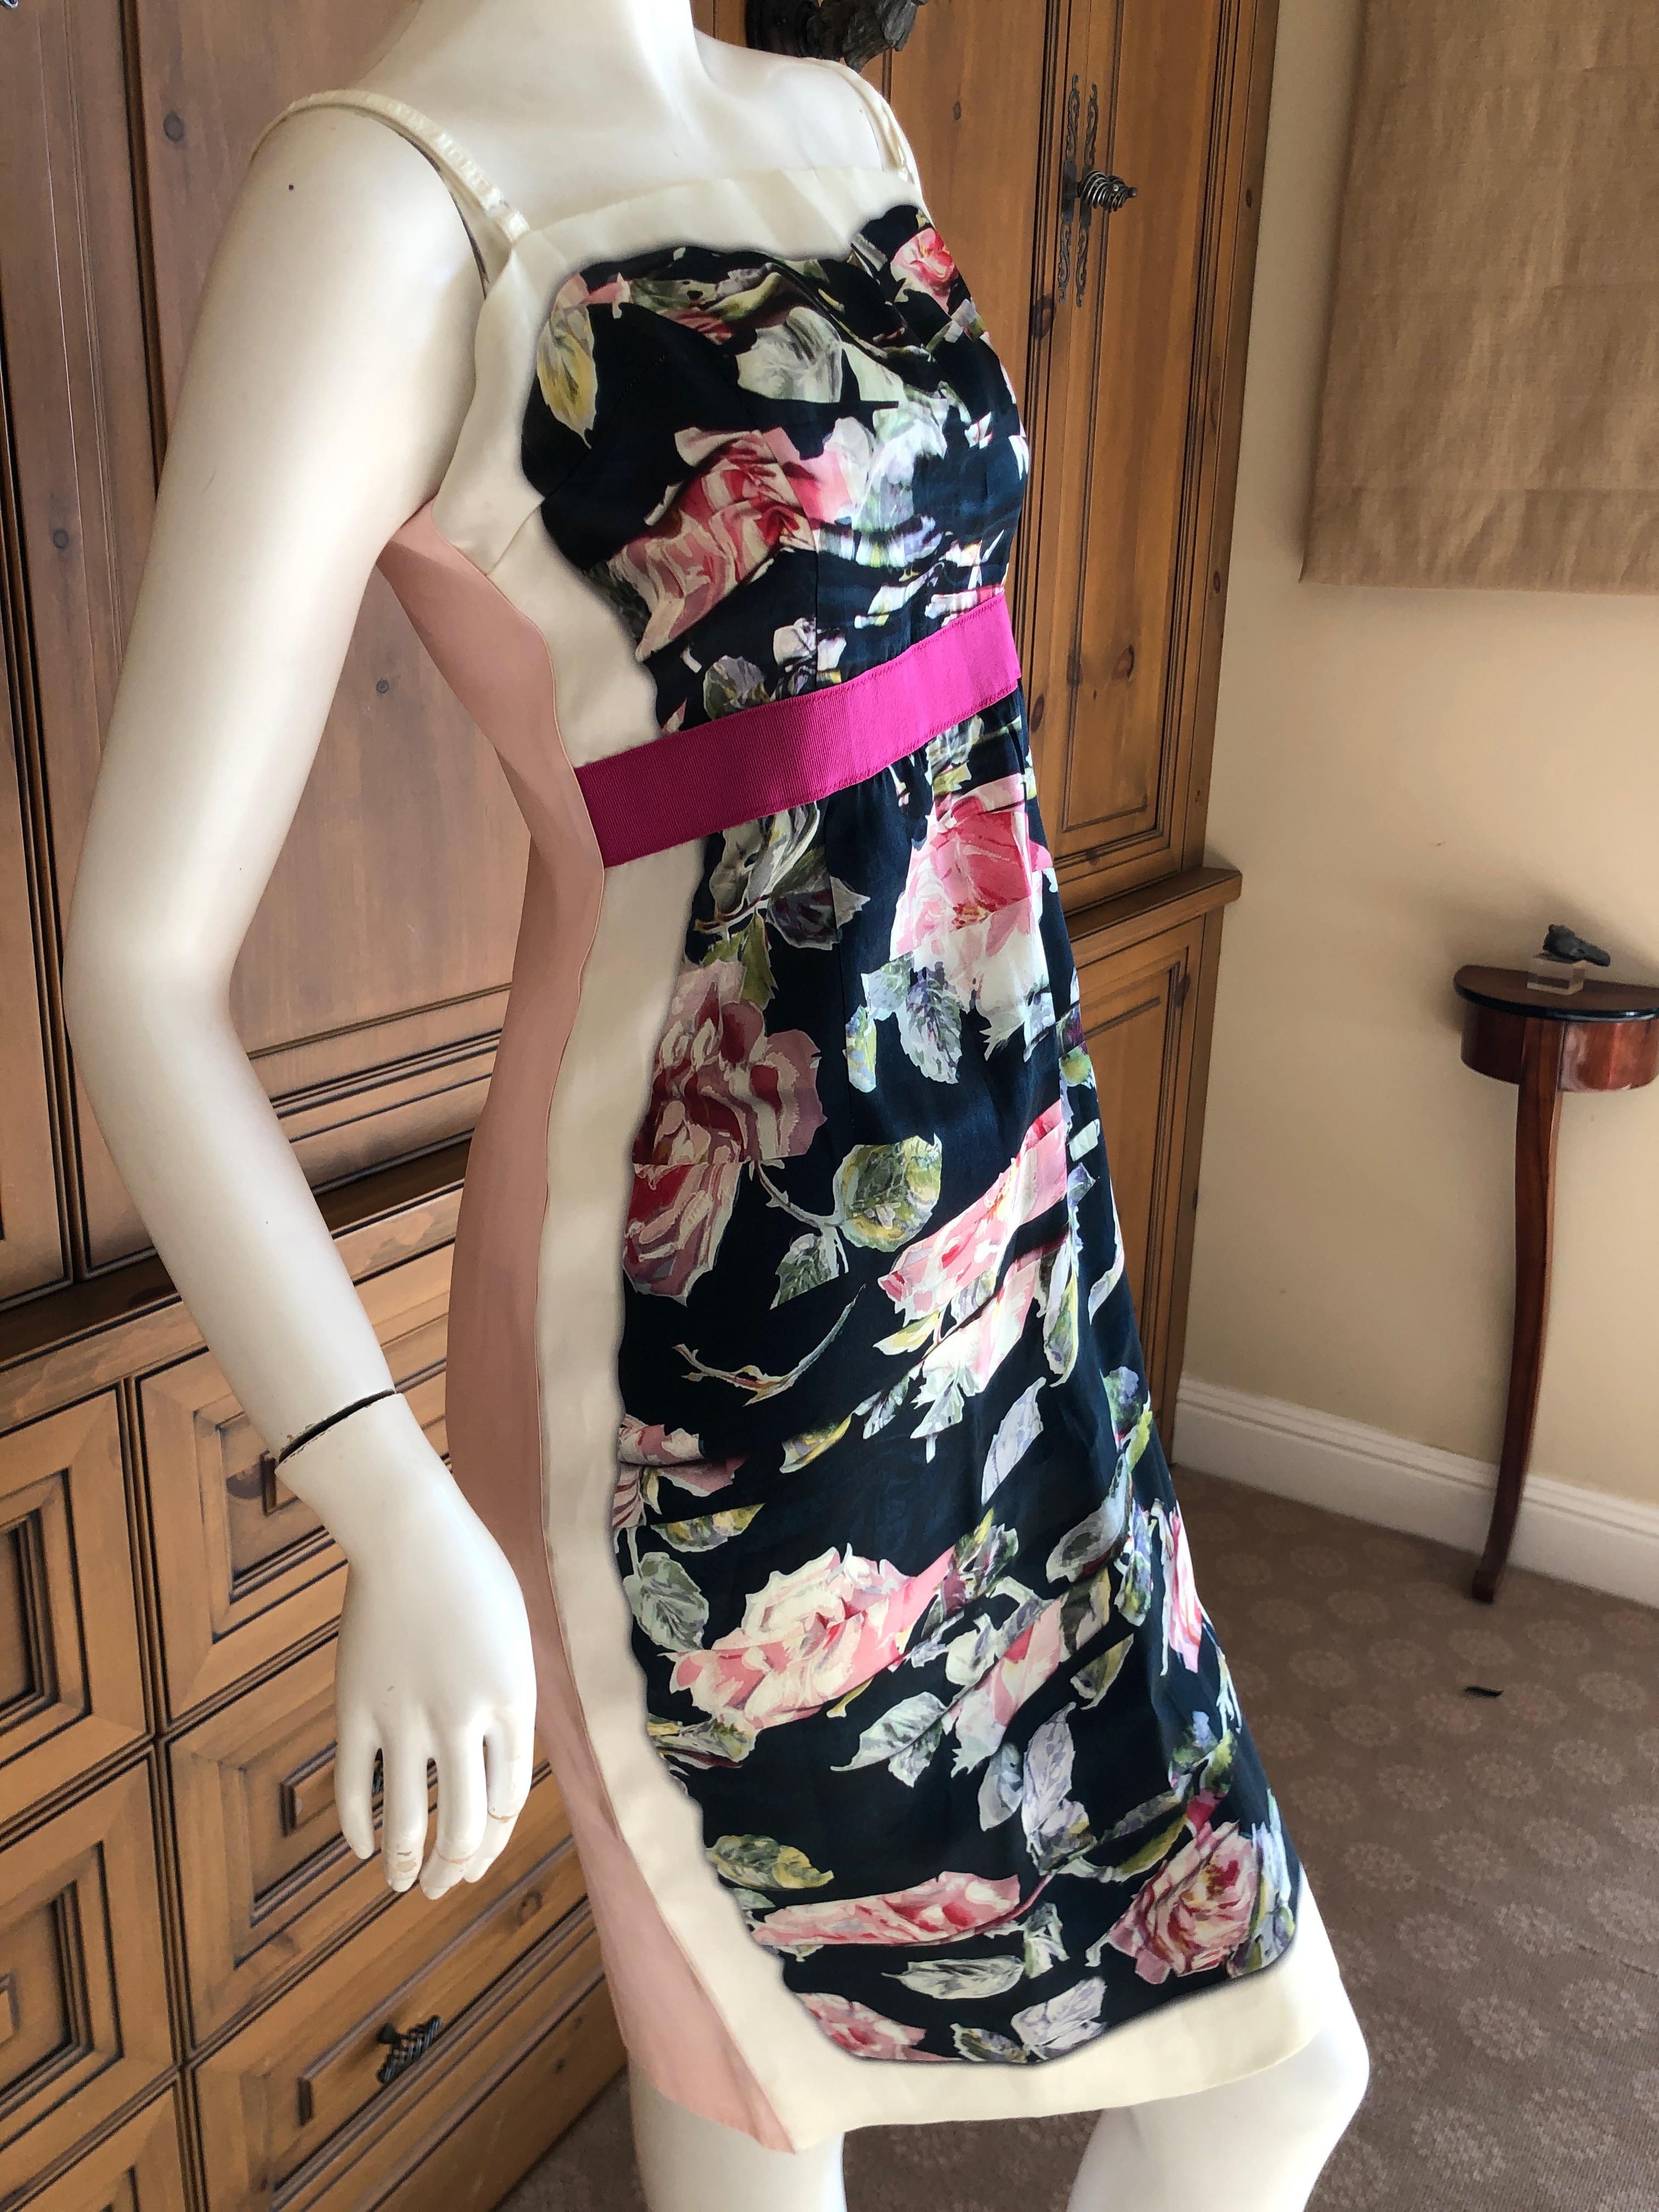 D&G Dolce & Gabbana Romantic Floral Dress In Excellent Condition For Sale In Cloverdale, CA